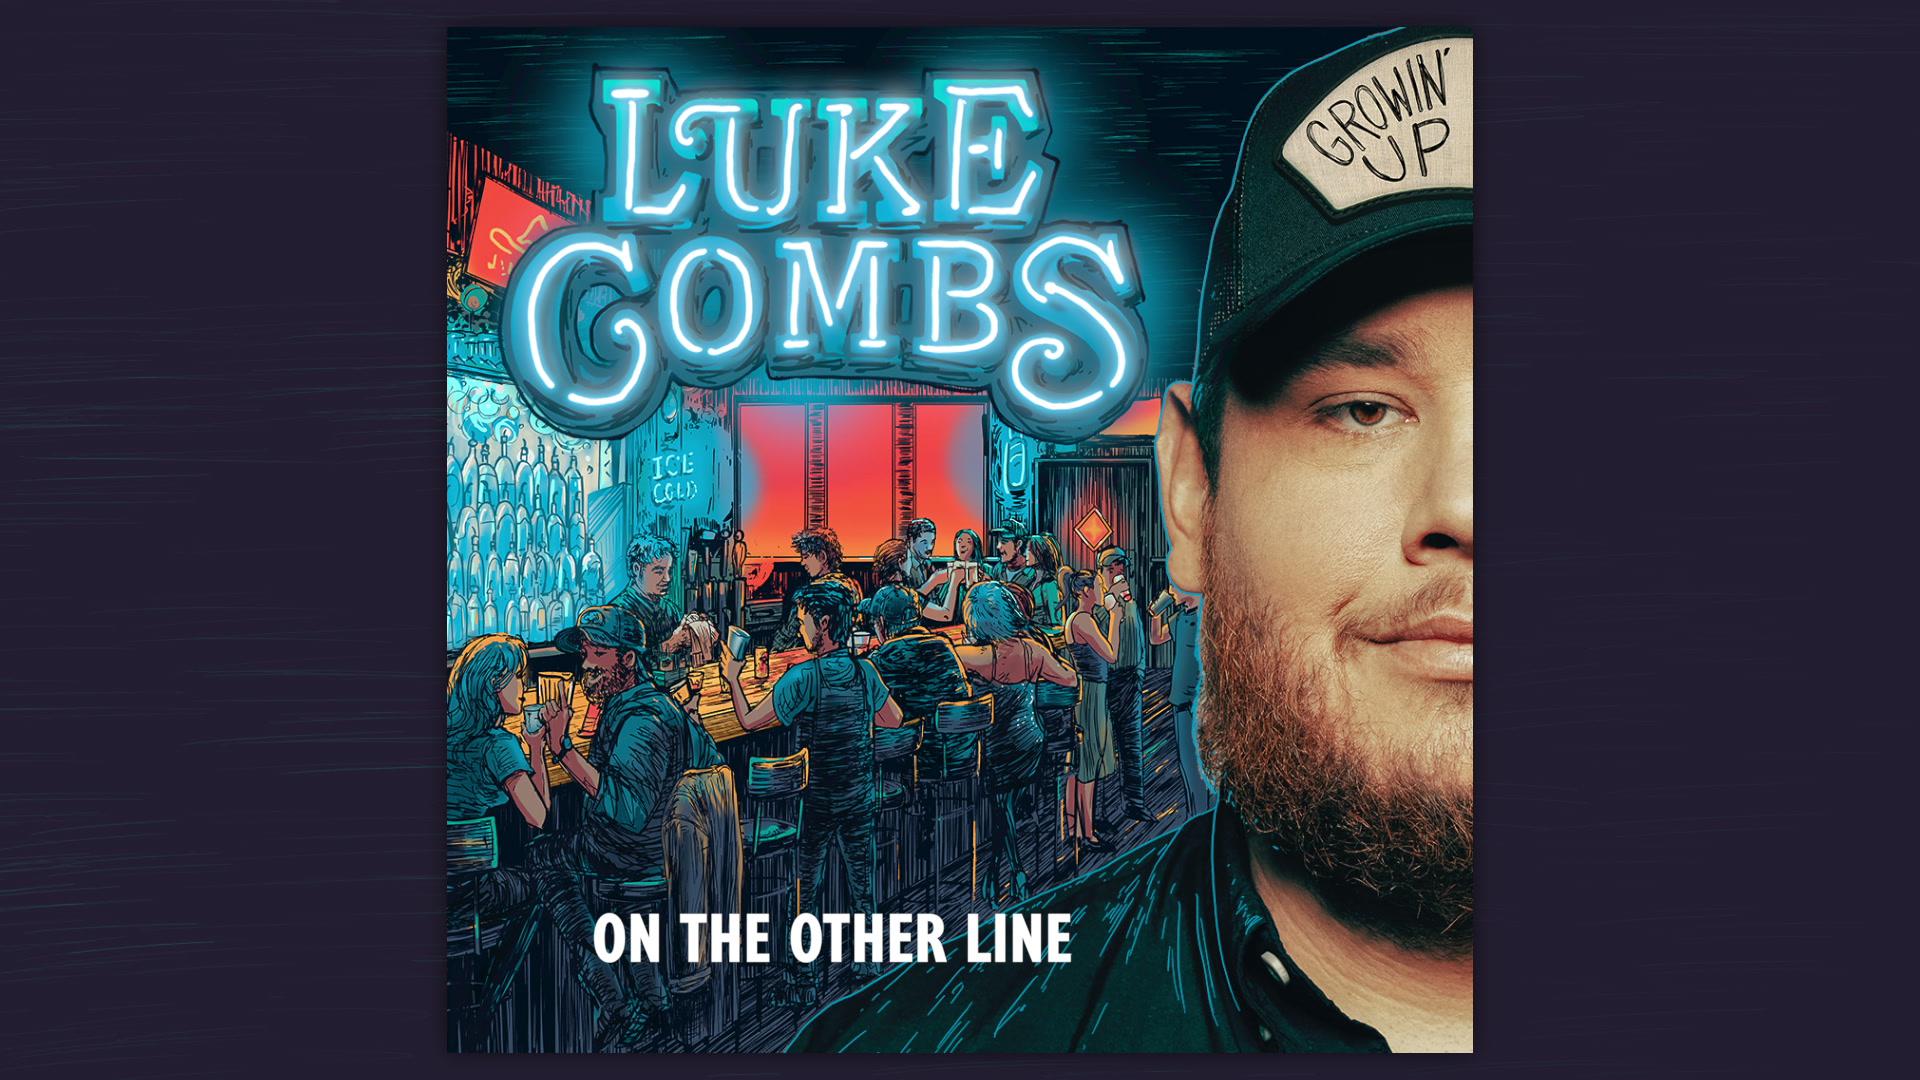 Luke Combs - On the Other Line (Official Audio)